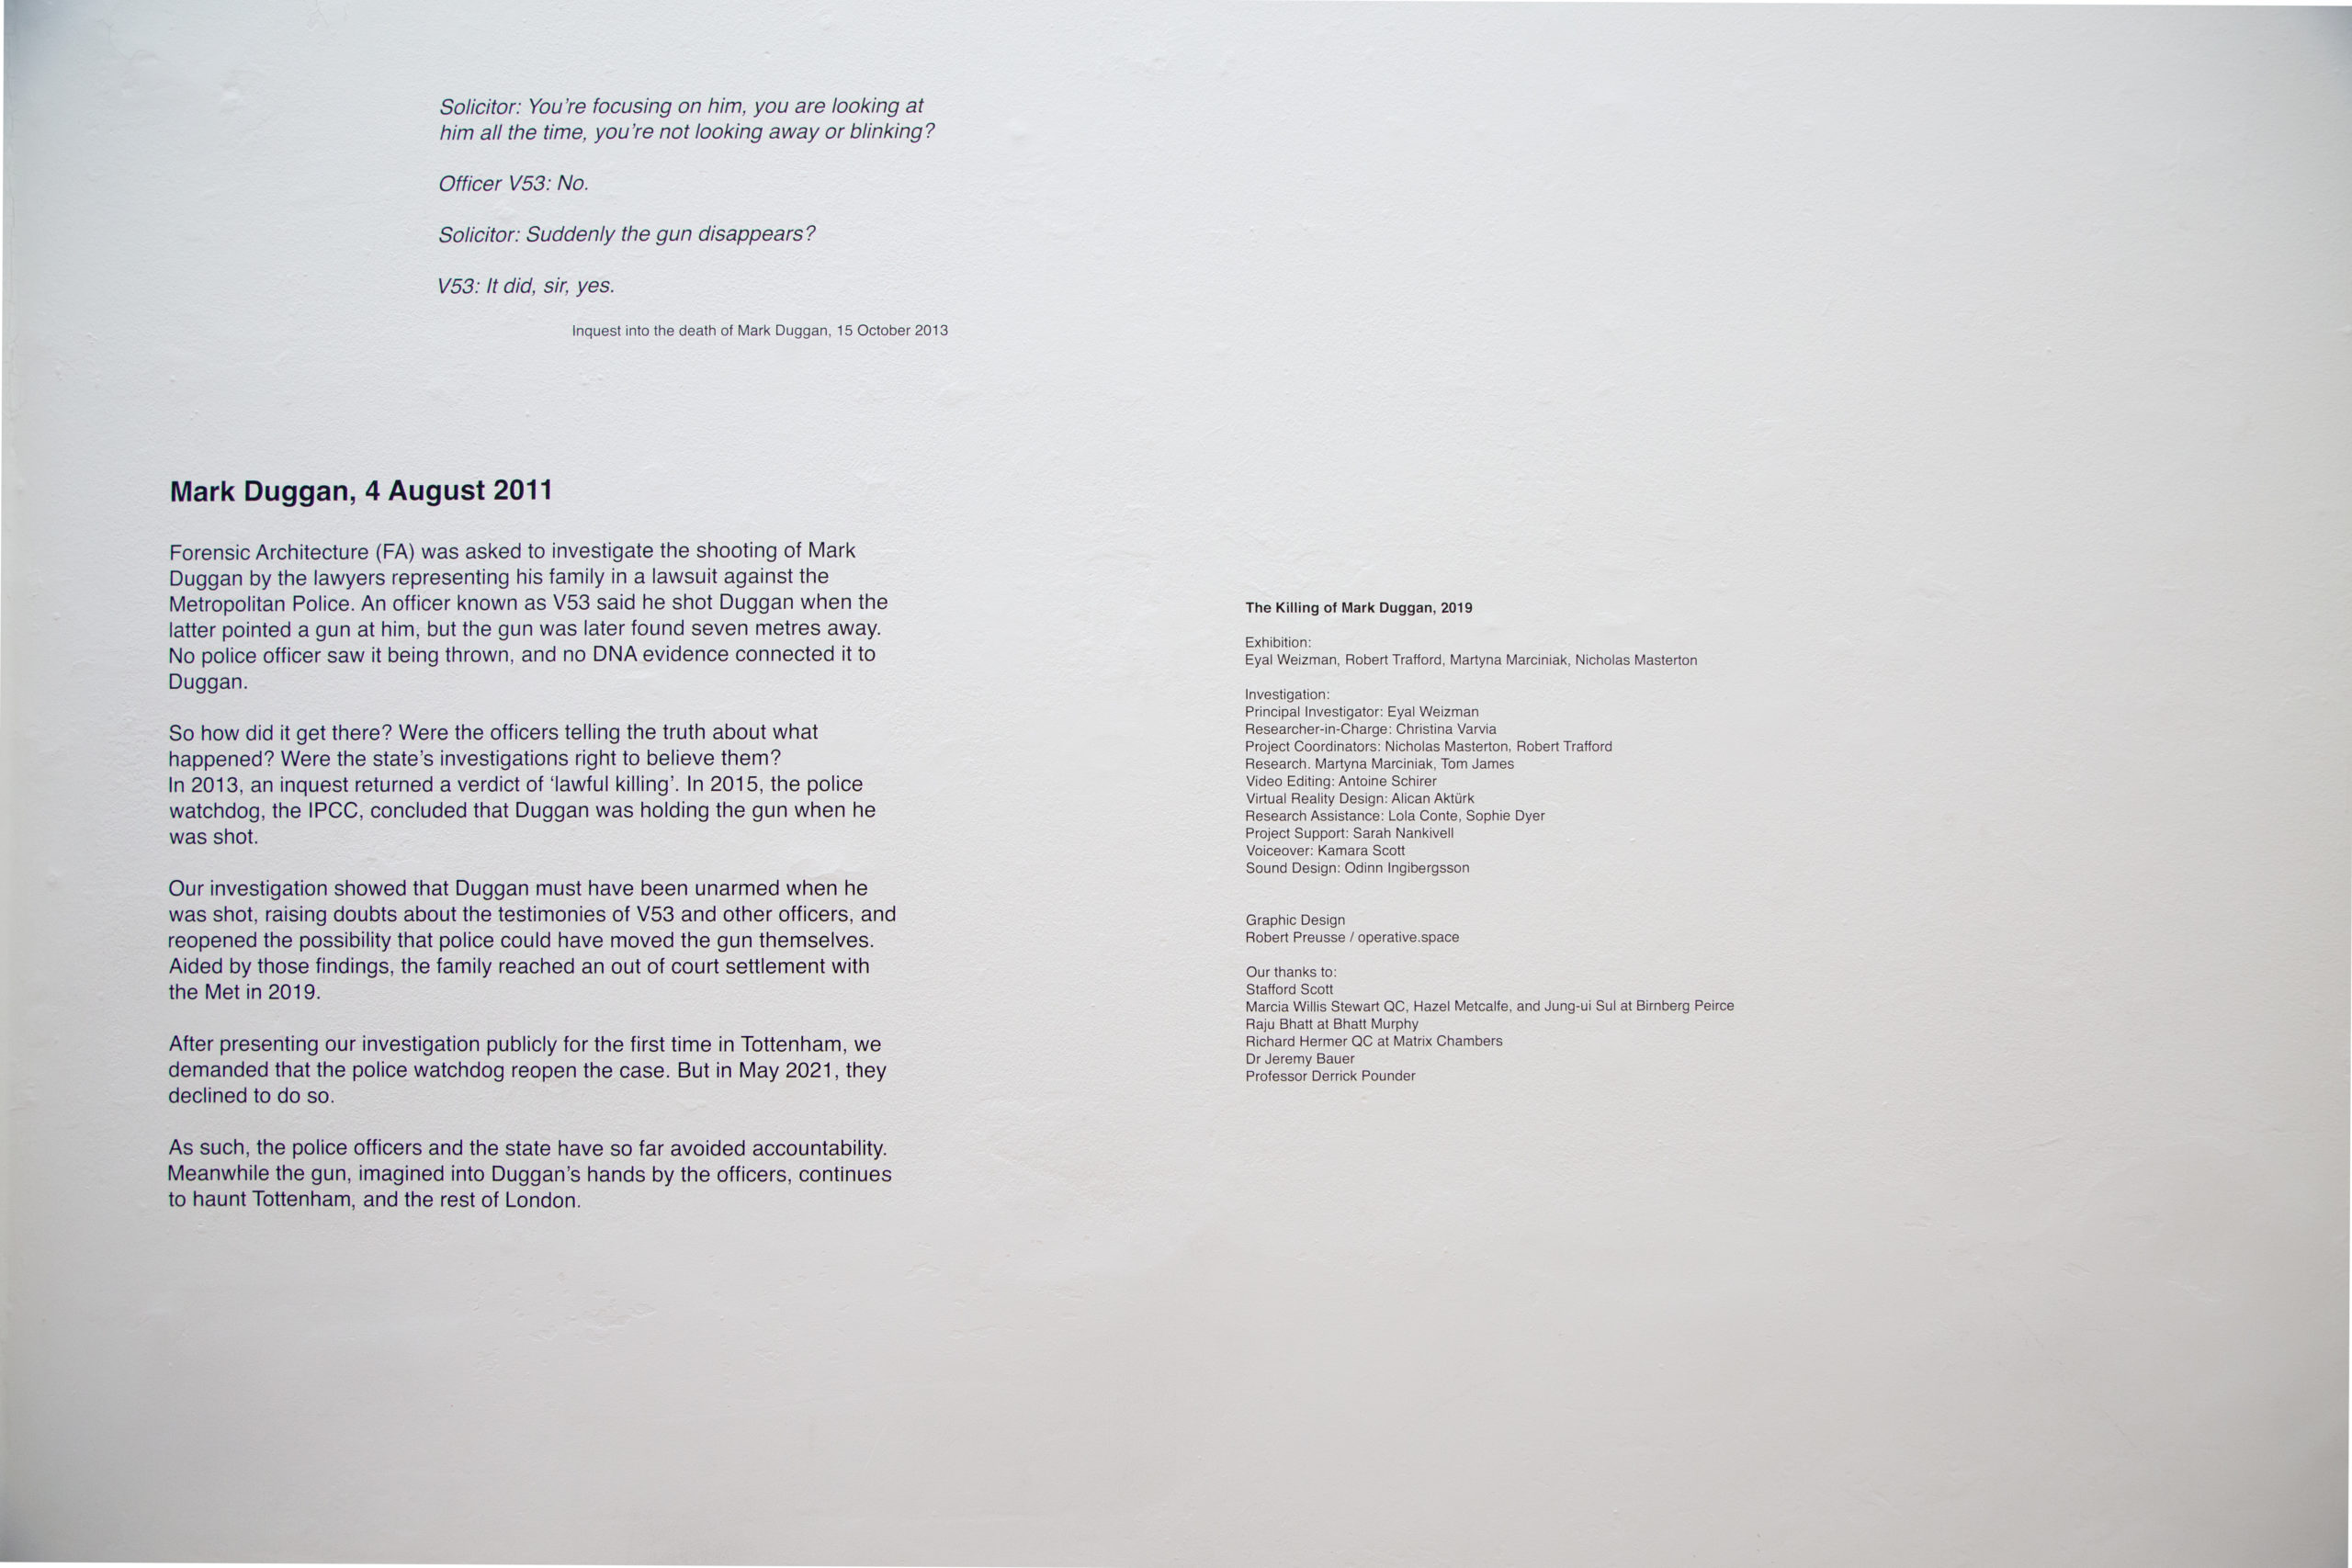 Text on a blank white wall that briefly introduces the Forensic Architecture's investigation of Mark Duggan's death.